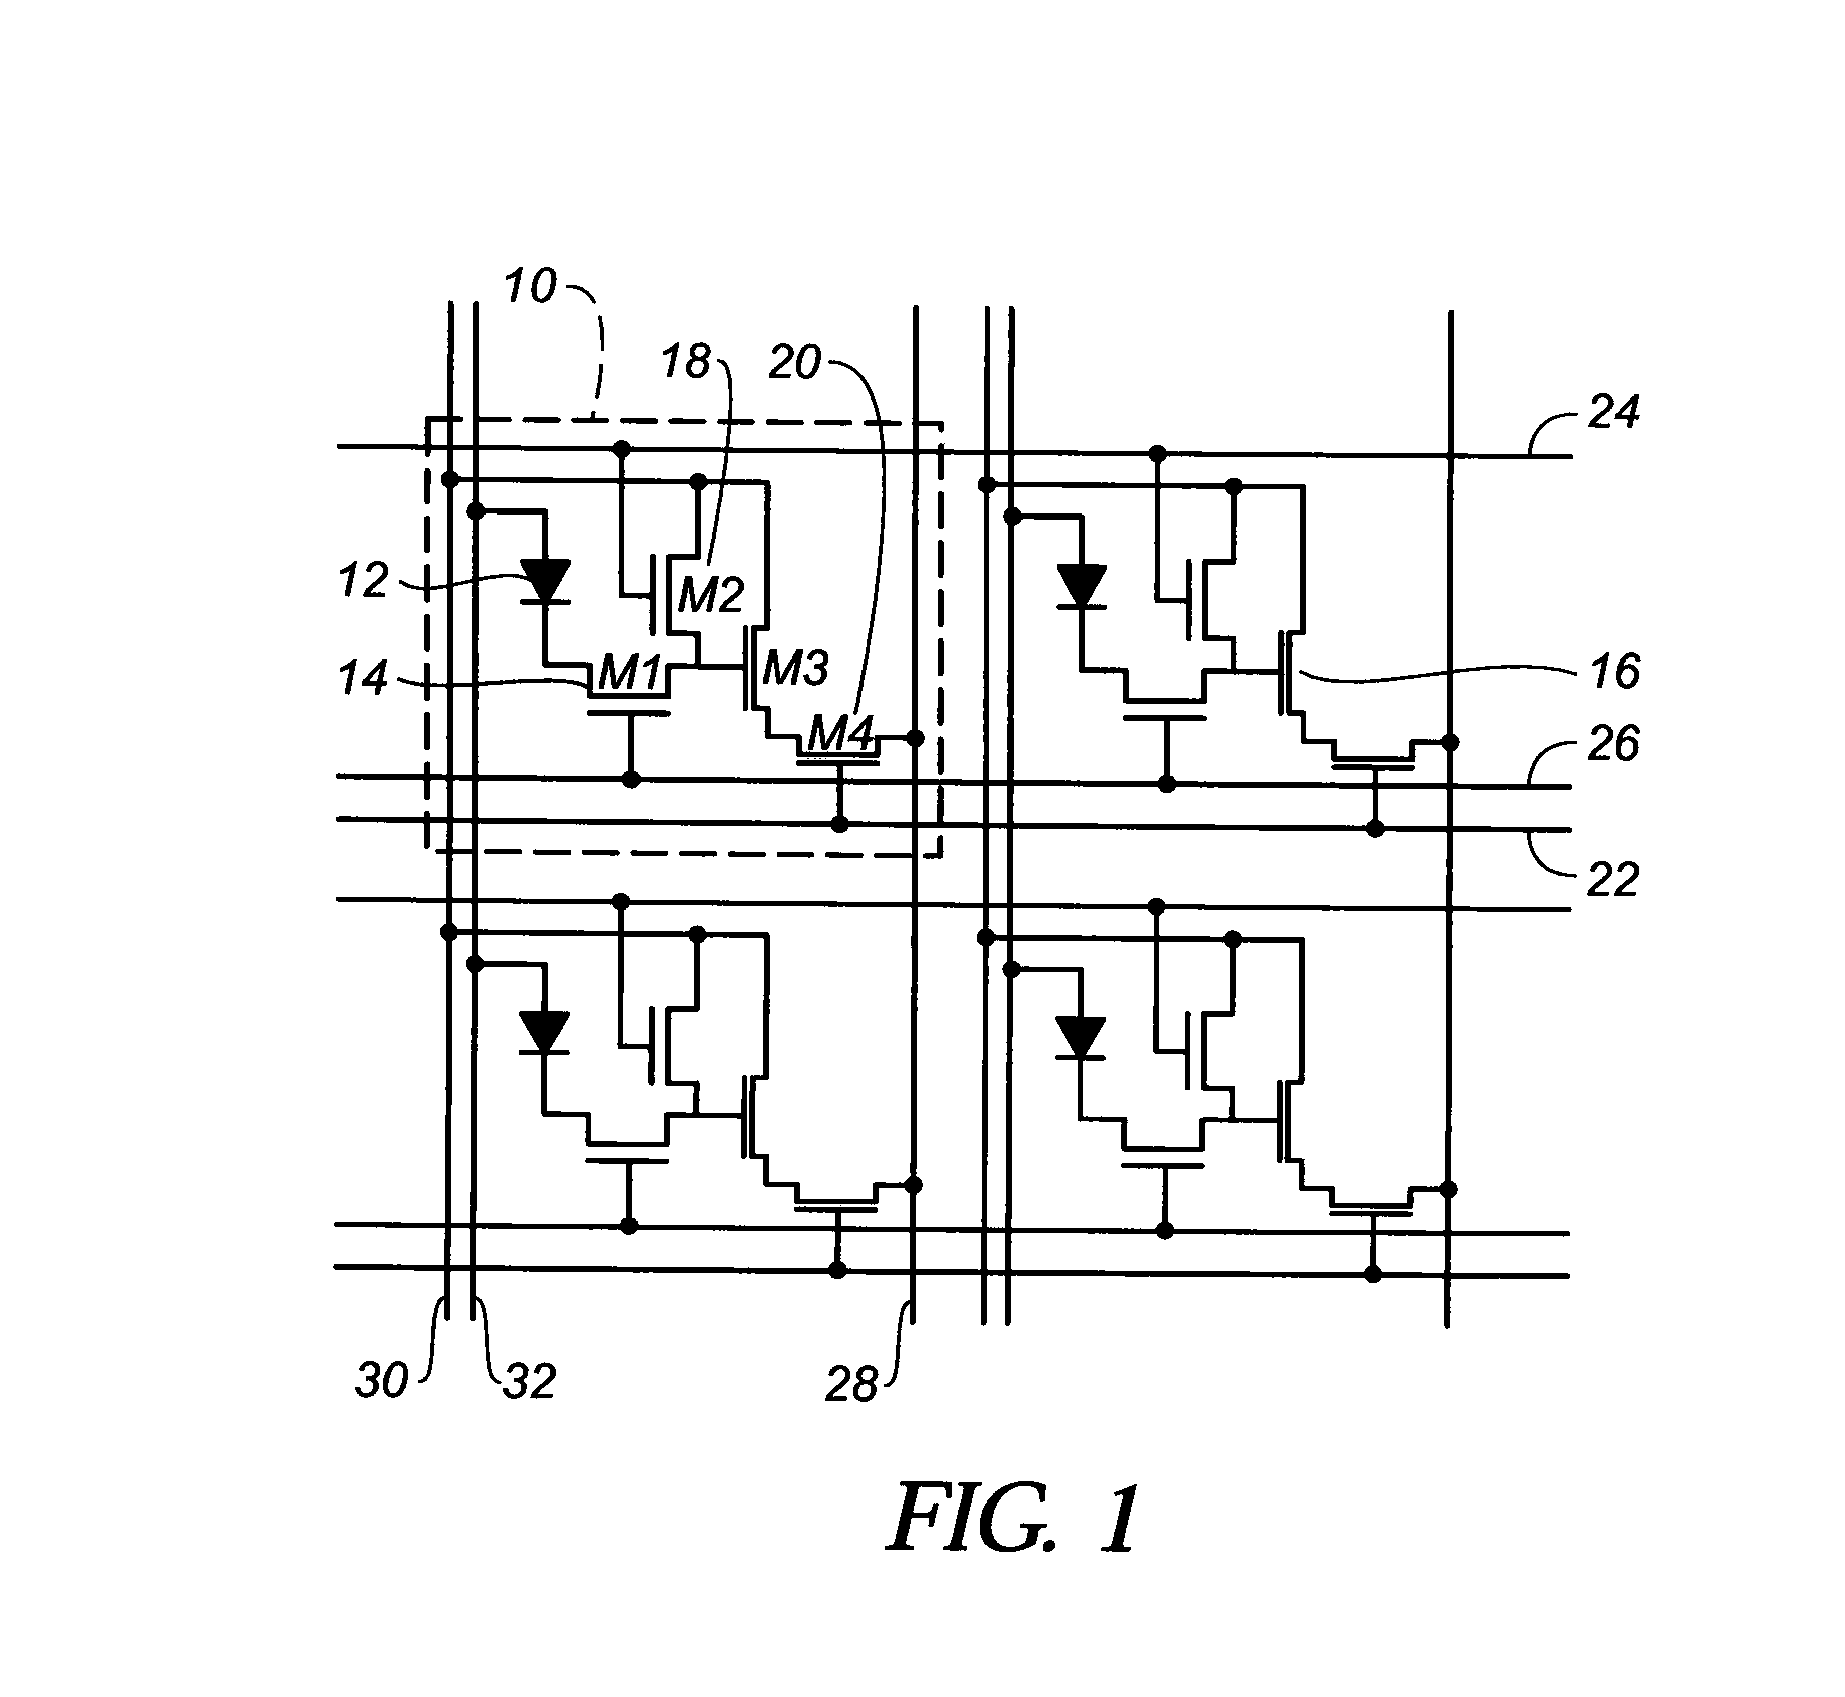 Digital radiography imager with buried interconnect layer in silicon-on-glass and method of fabricating same